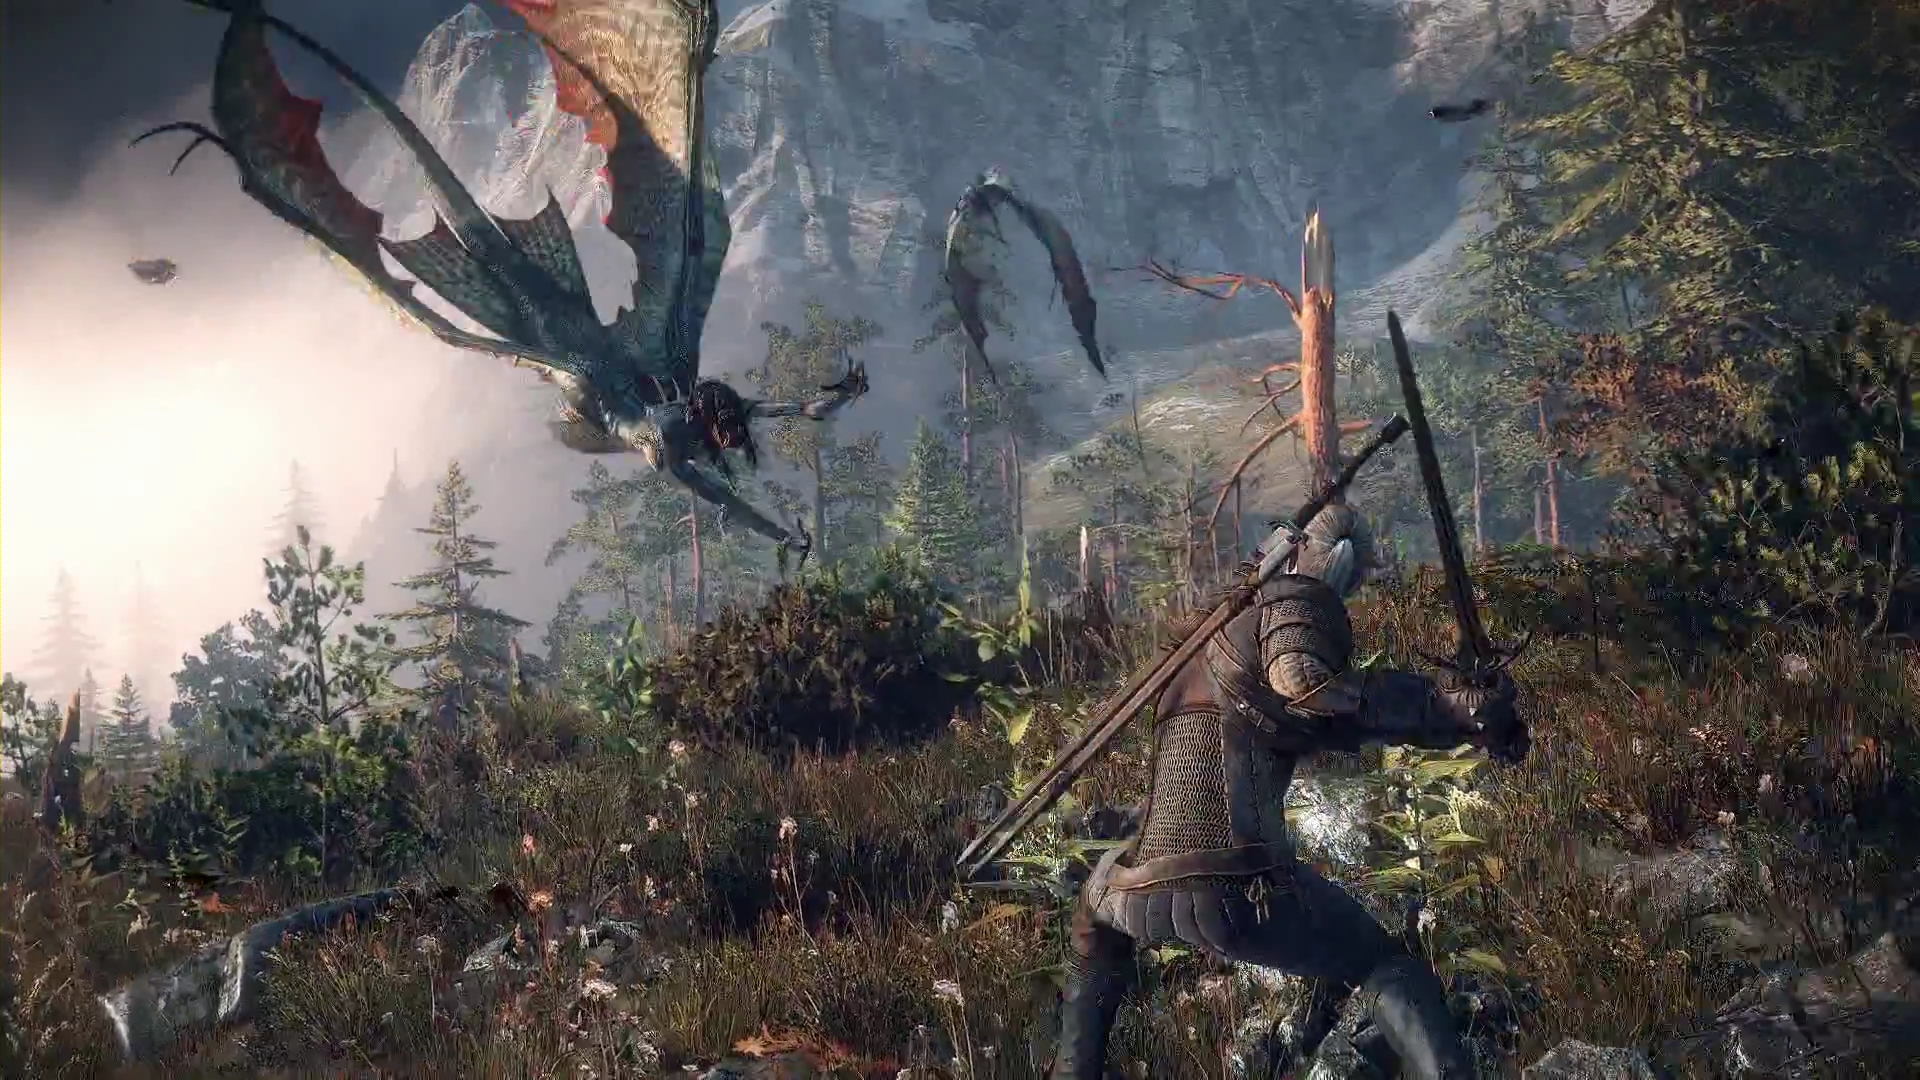  the Collection The Witcher Video Game The Witcher 3 Wild Hunt 485940 1920x1080